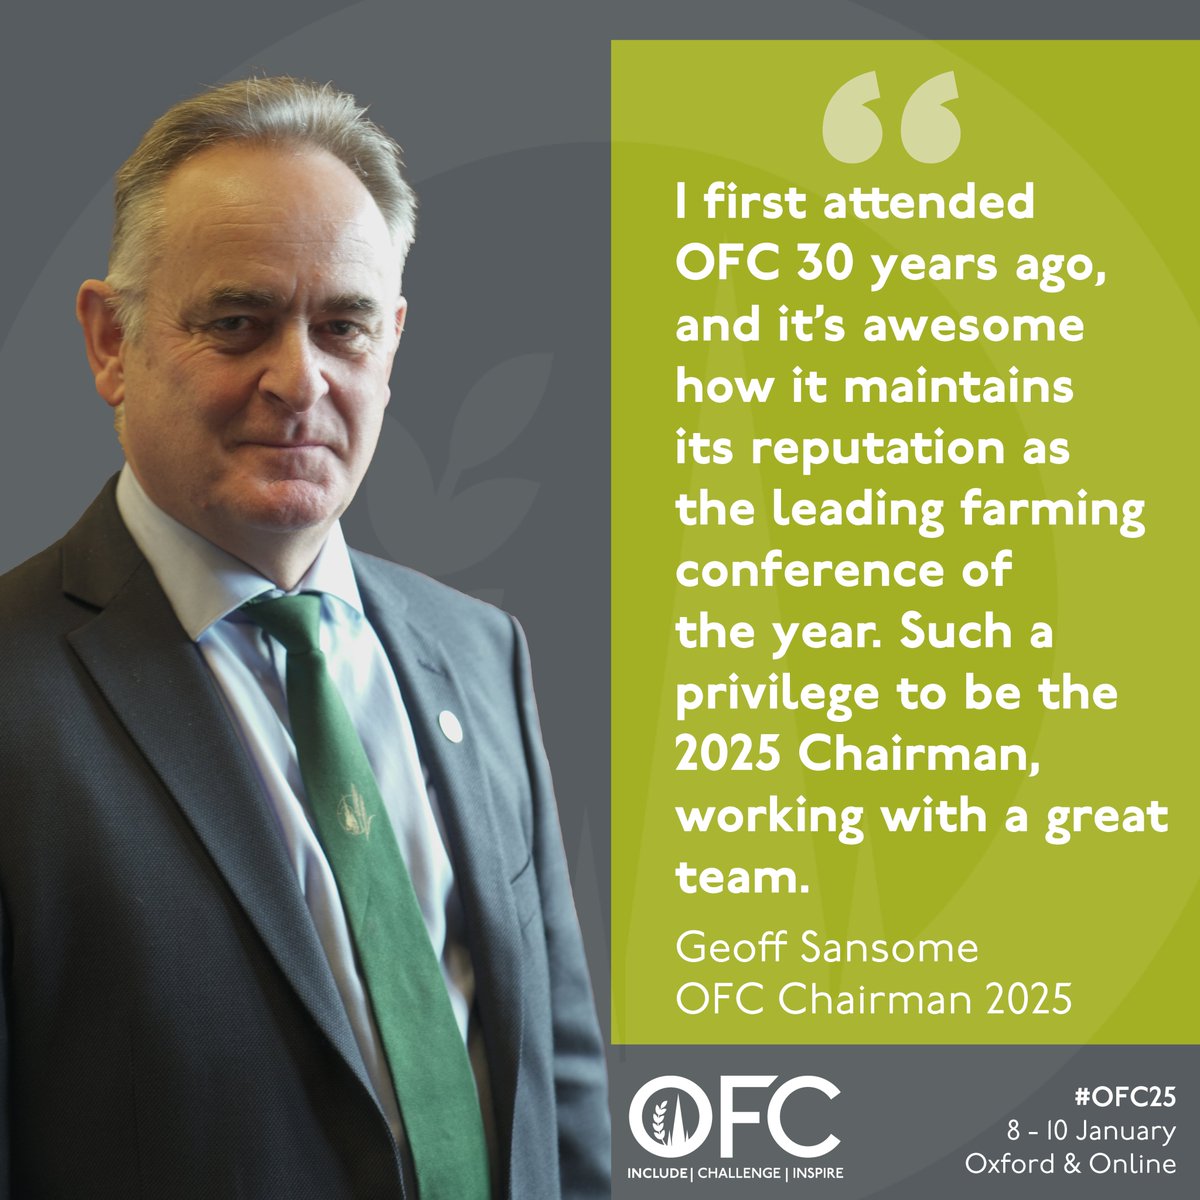 Would you like to help shape the UK's leading farming conference? We are now welcoming applications from those interested in joining the council of directors for OFC 2026-2028. Find out about candidate requirements and how to apply here: ofc.org.uk/director-recru… @HawfordFarm